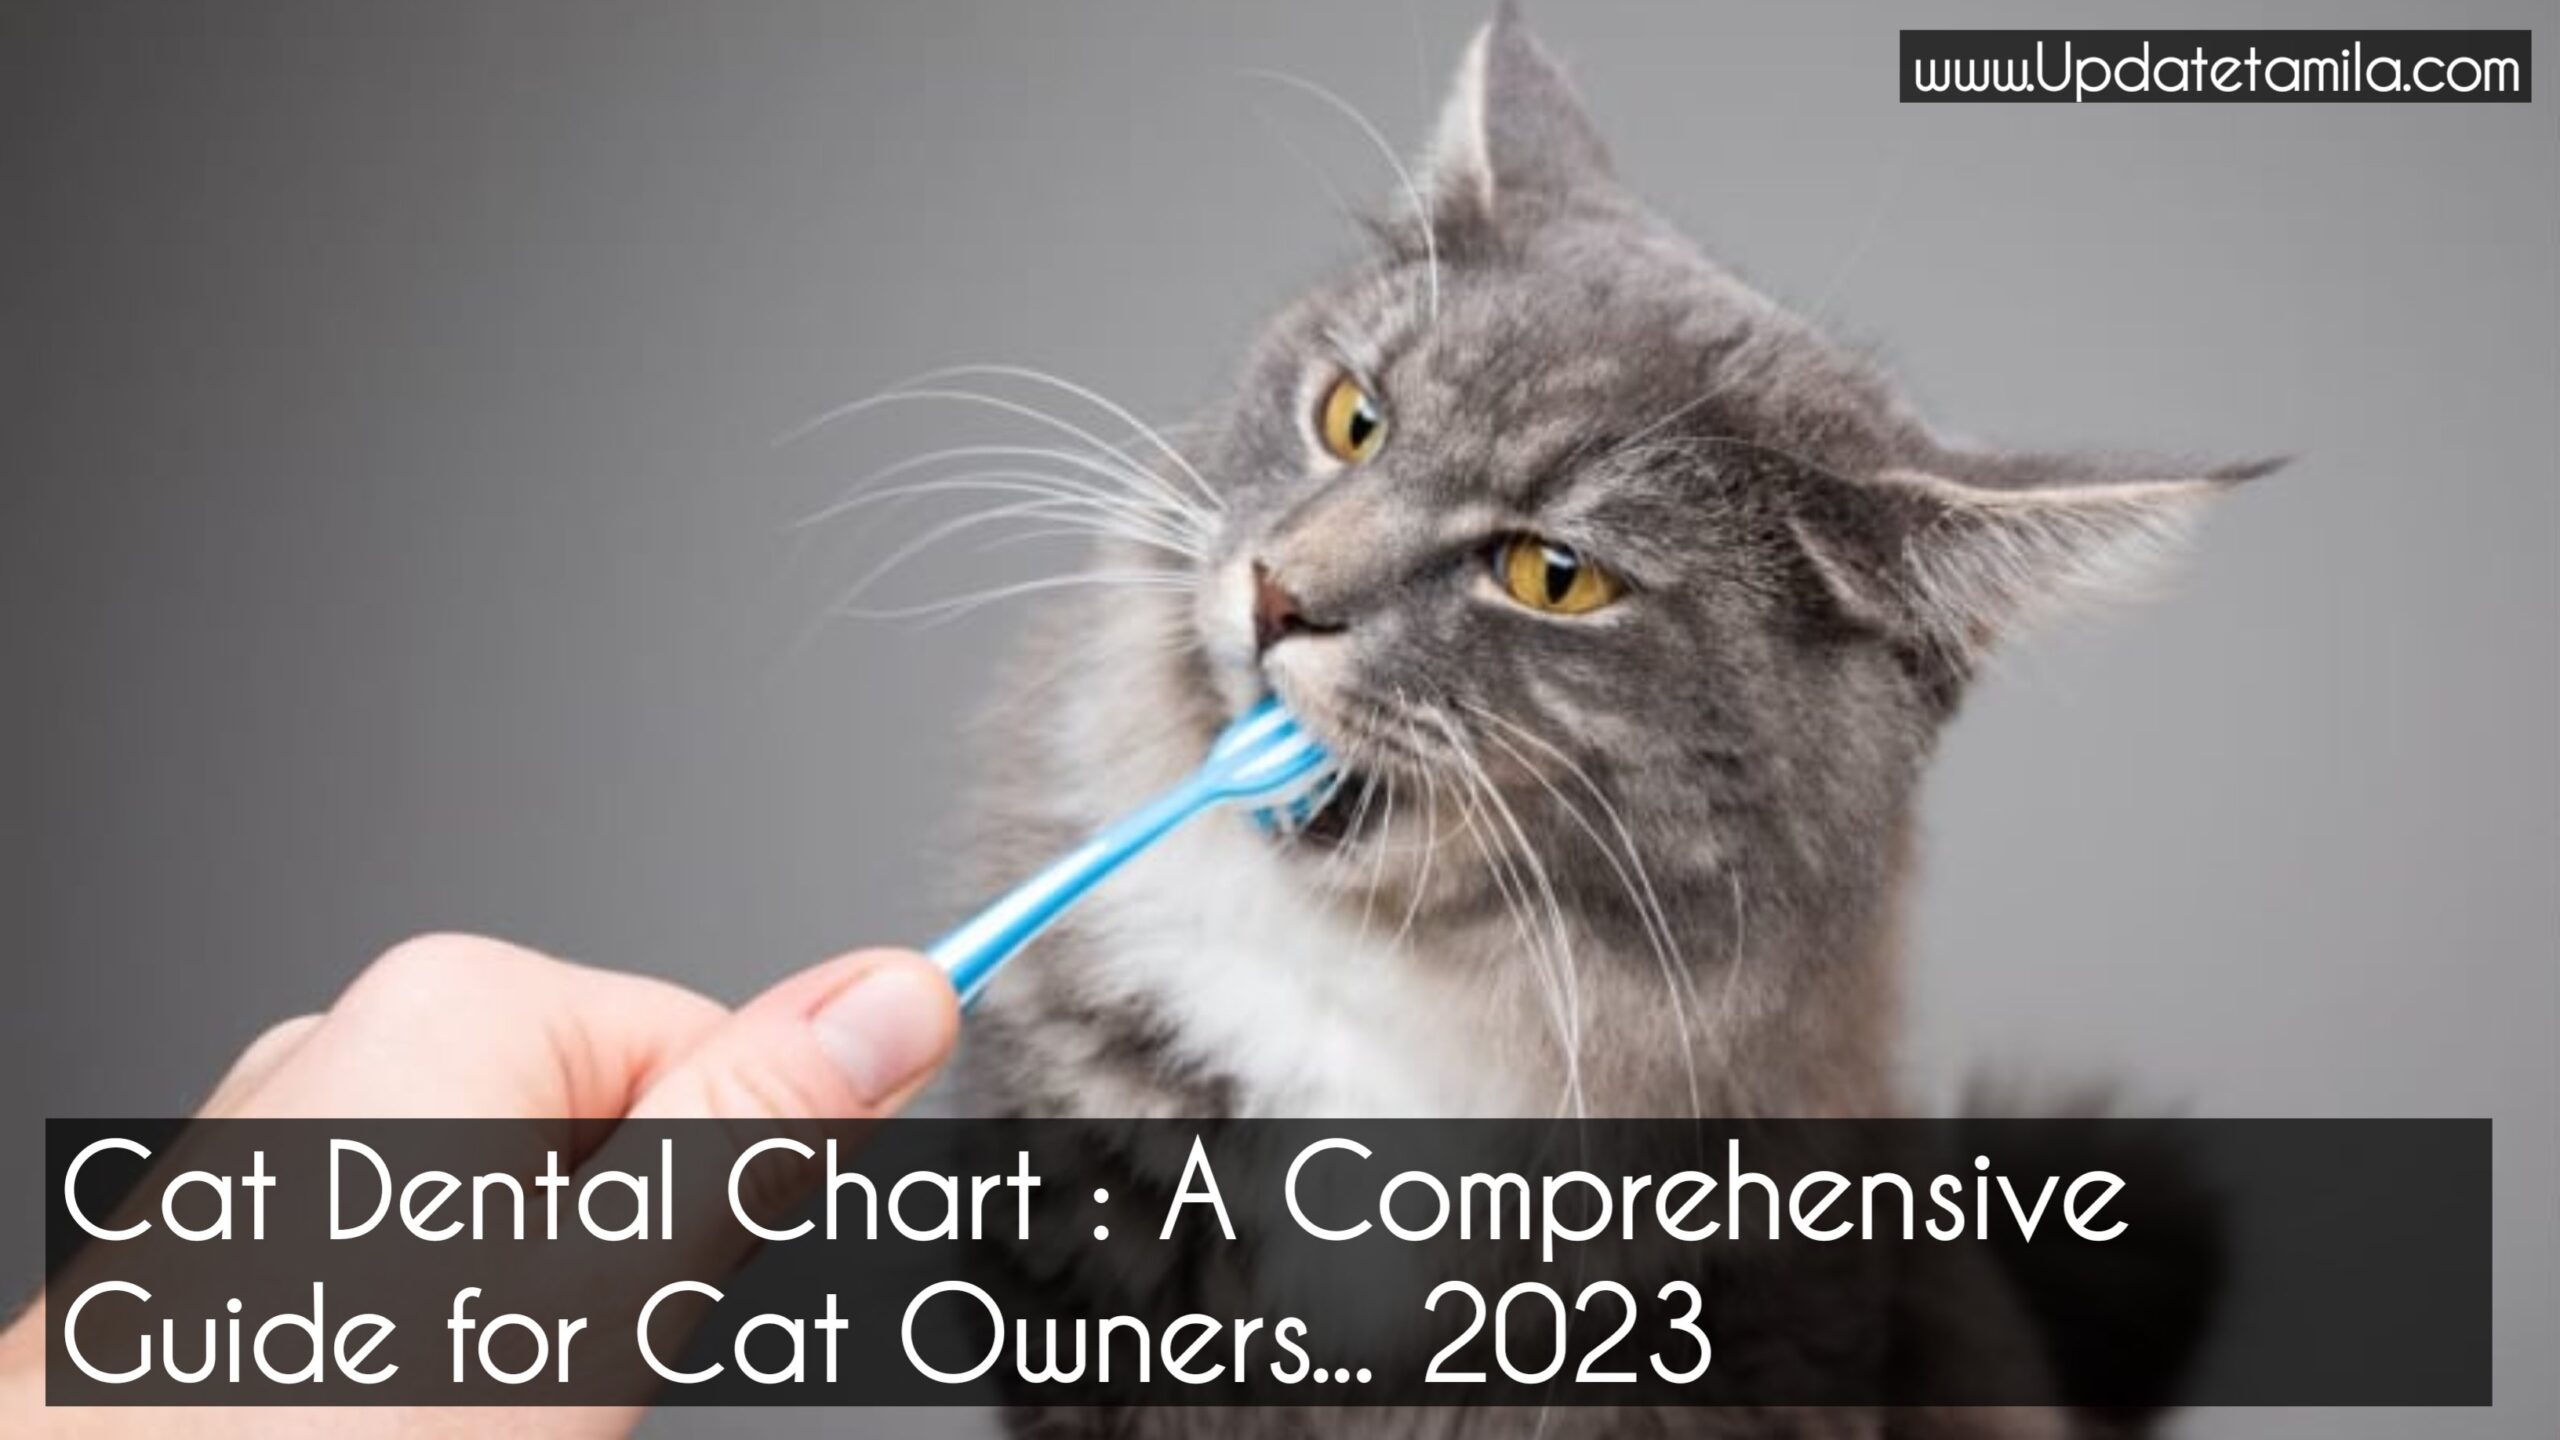 Cat Dental Chart : A Comprehensive Guide for Cat Owners...2023